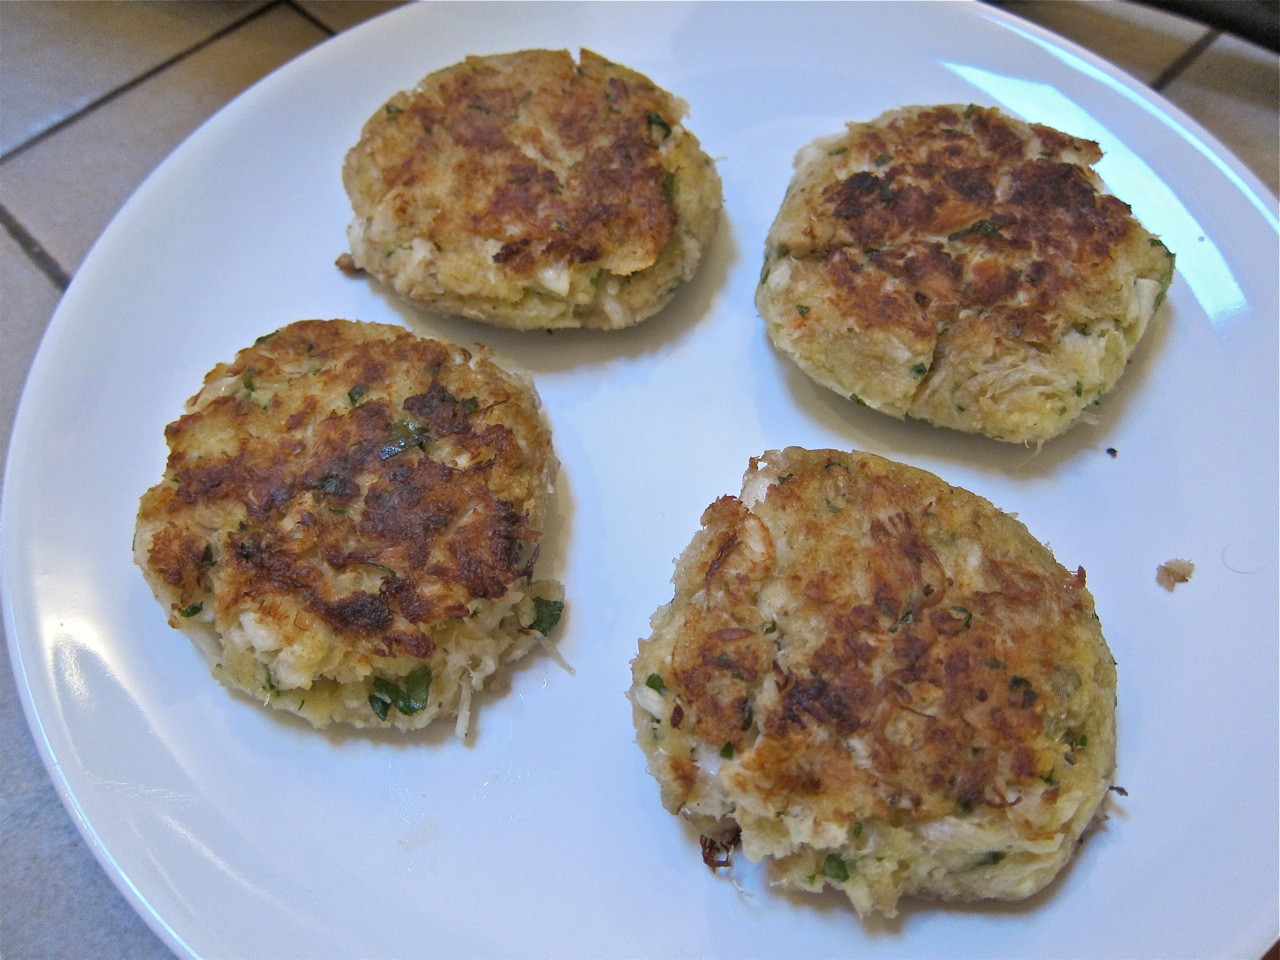 Top 30 Condiment for Crab Cakes - Best Recipes Ideas and ...